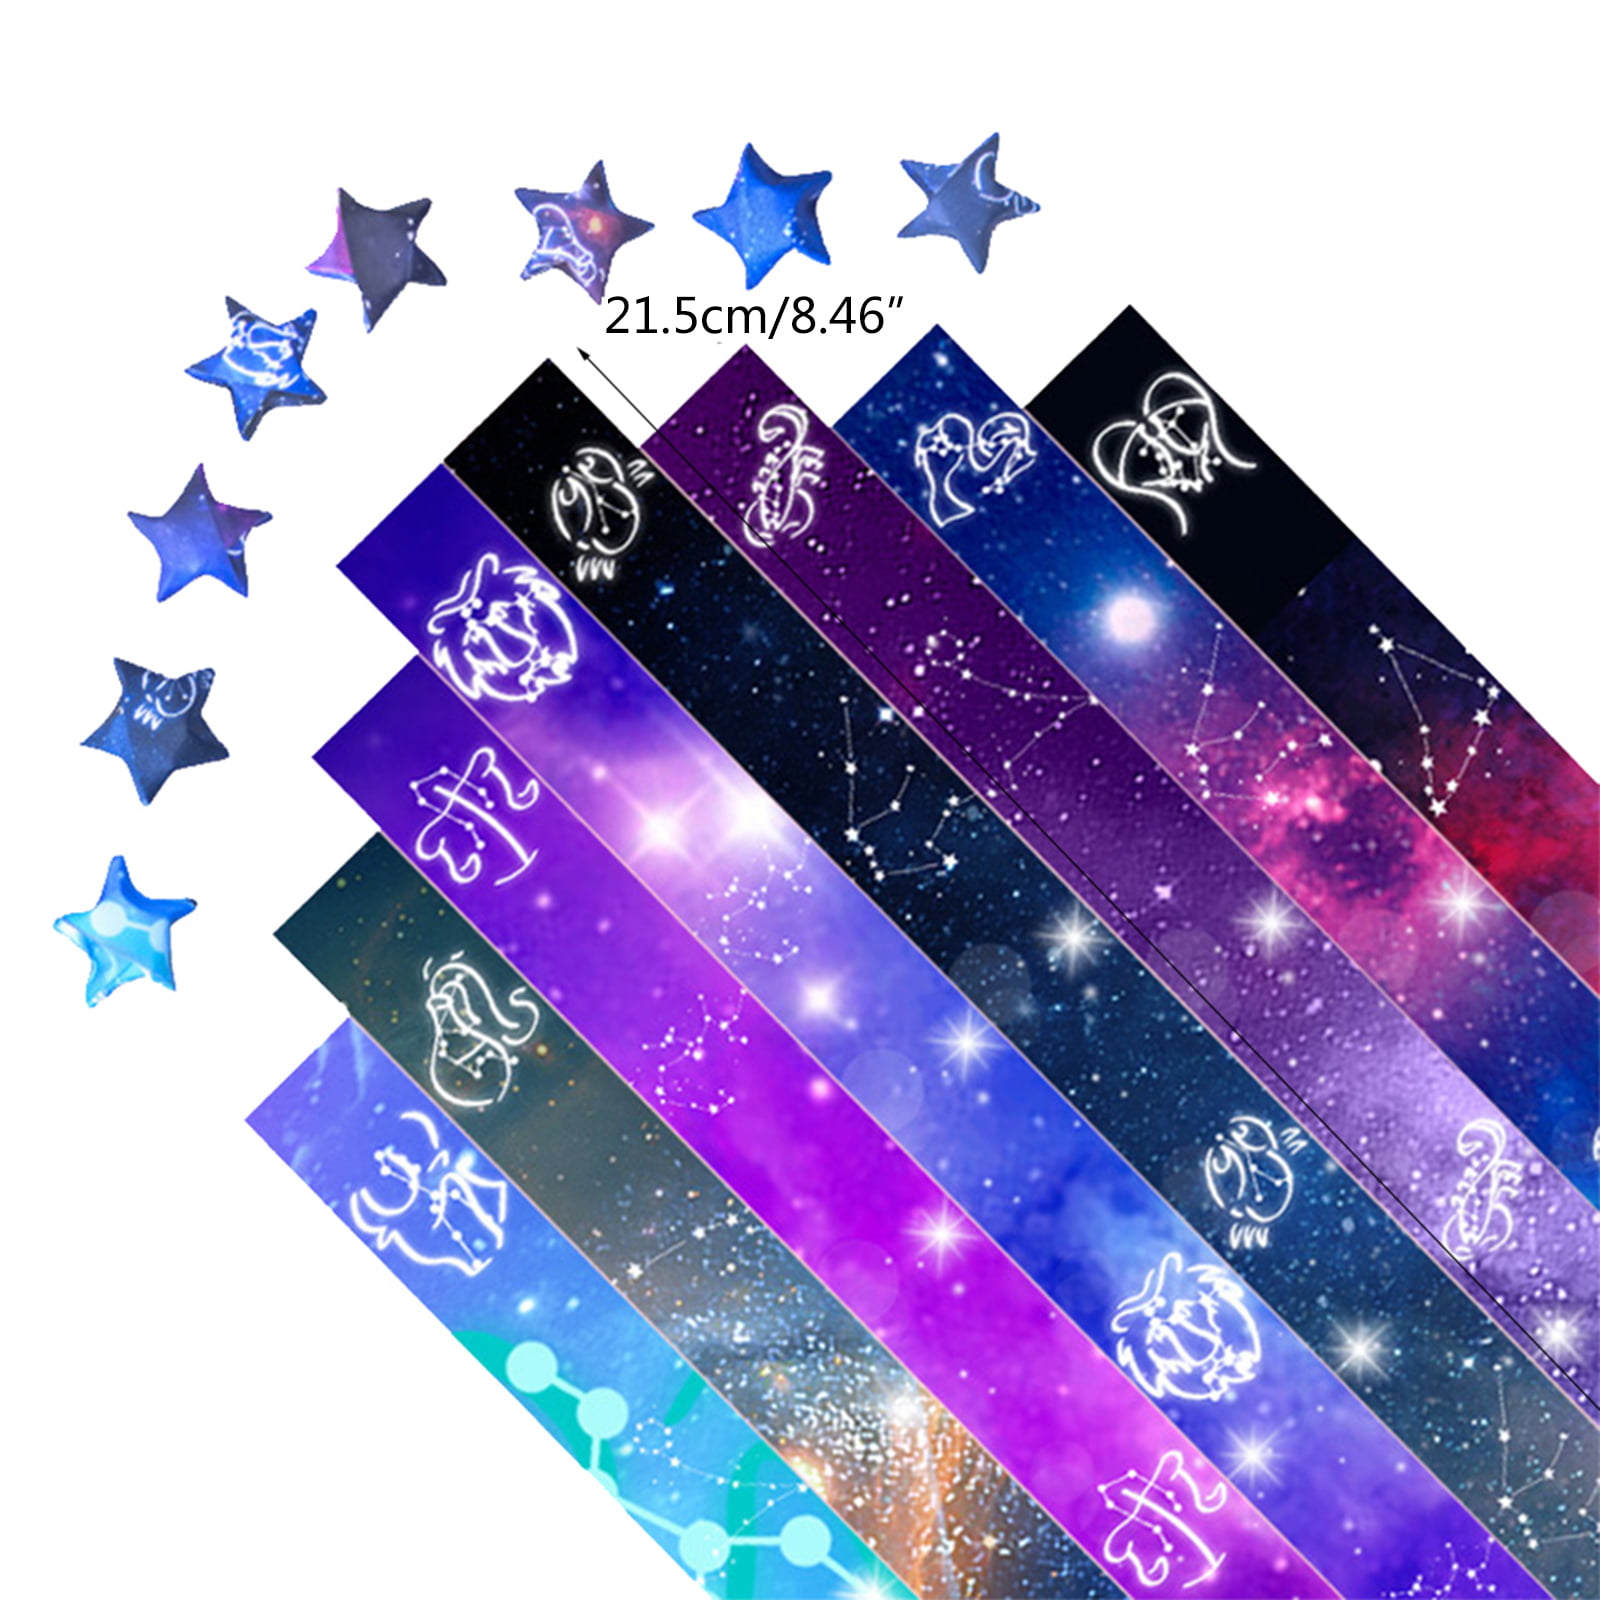 540Sheet Origami Stars Paper Strips27Colors Folding Paper Colorful Double  Sided Lucky Star Origami DIY Hand Arts Make Home Decor